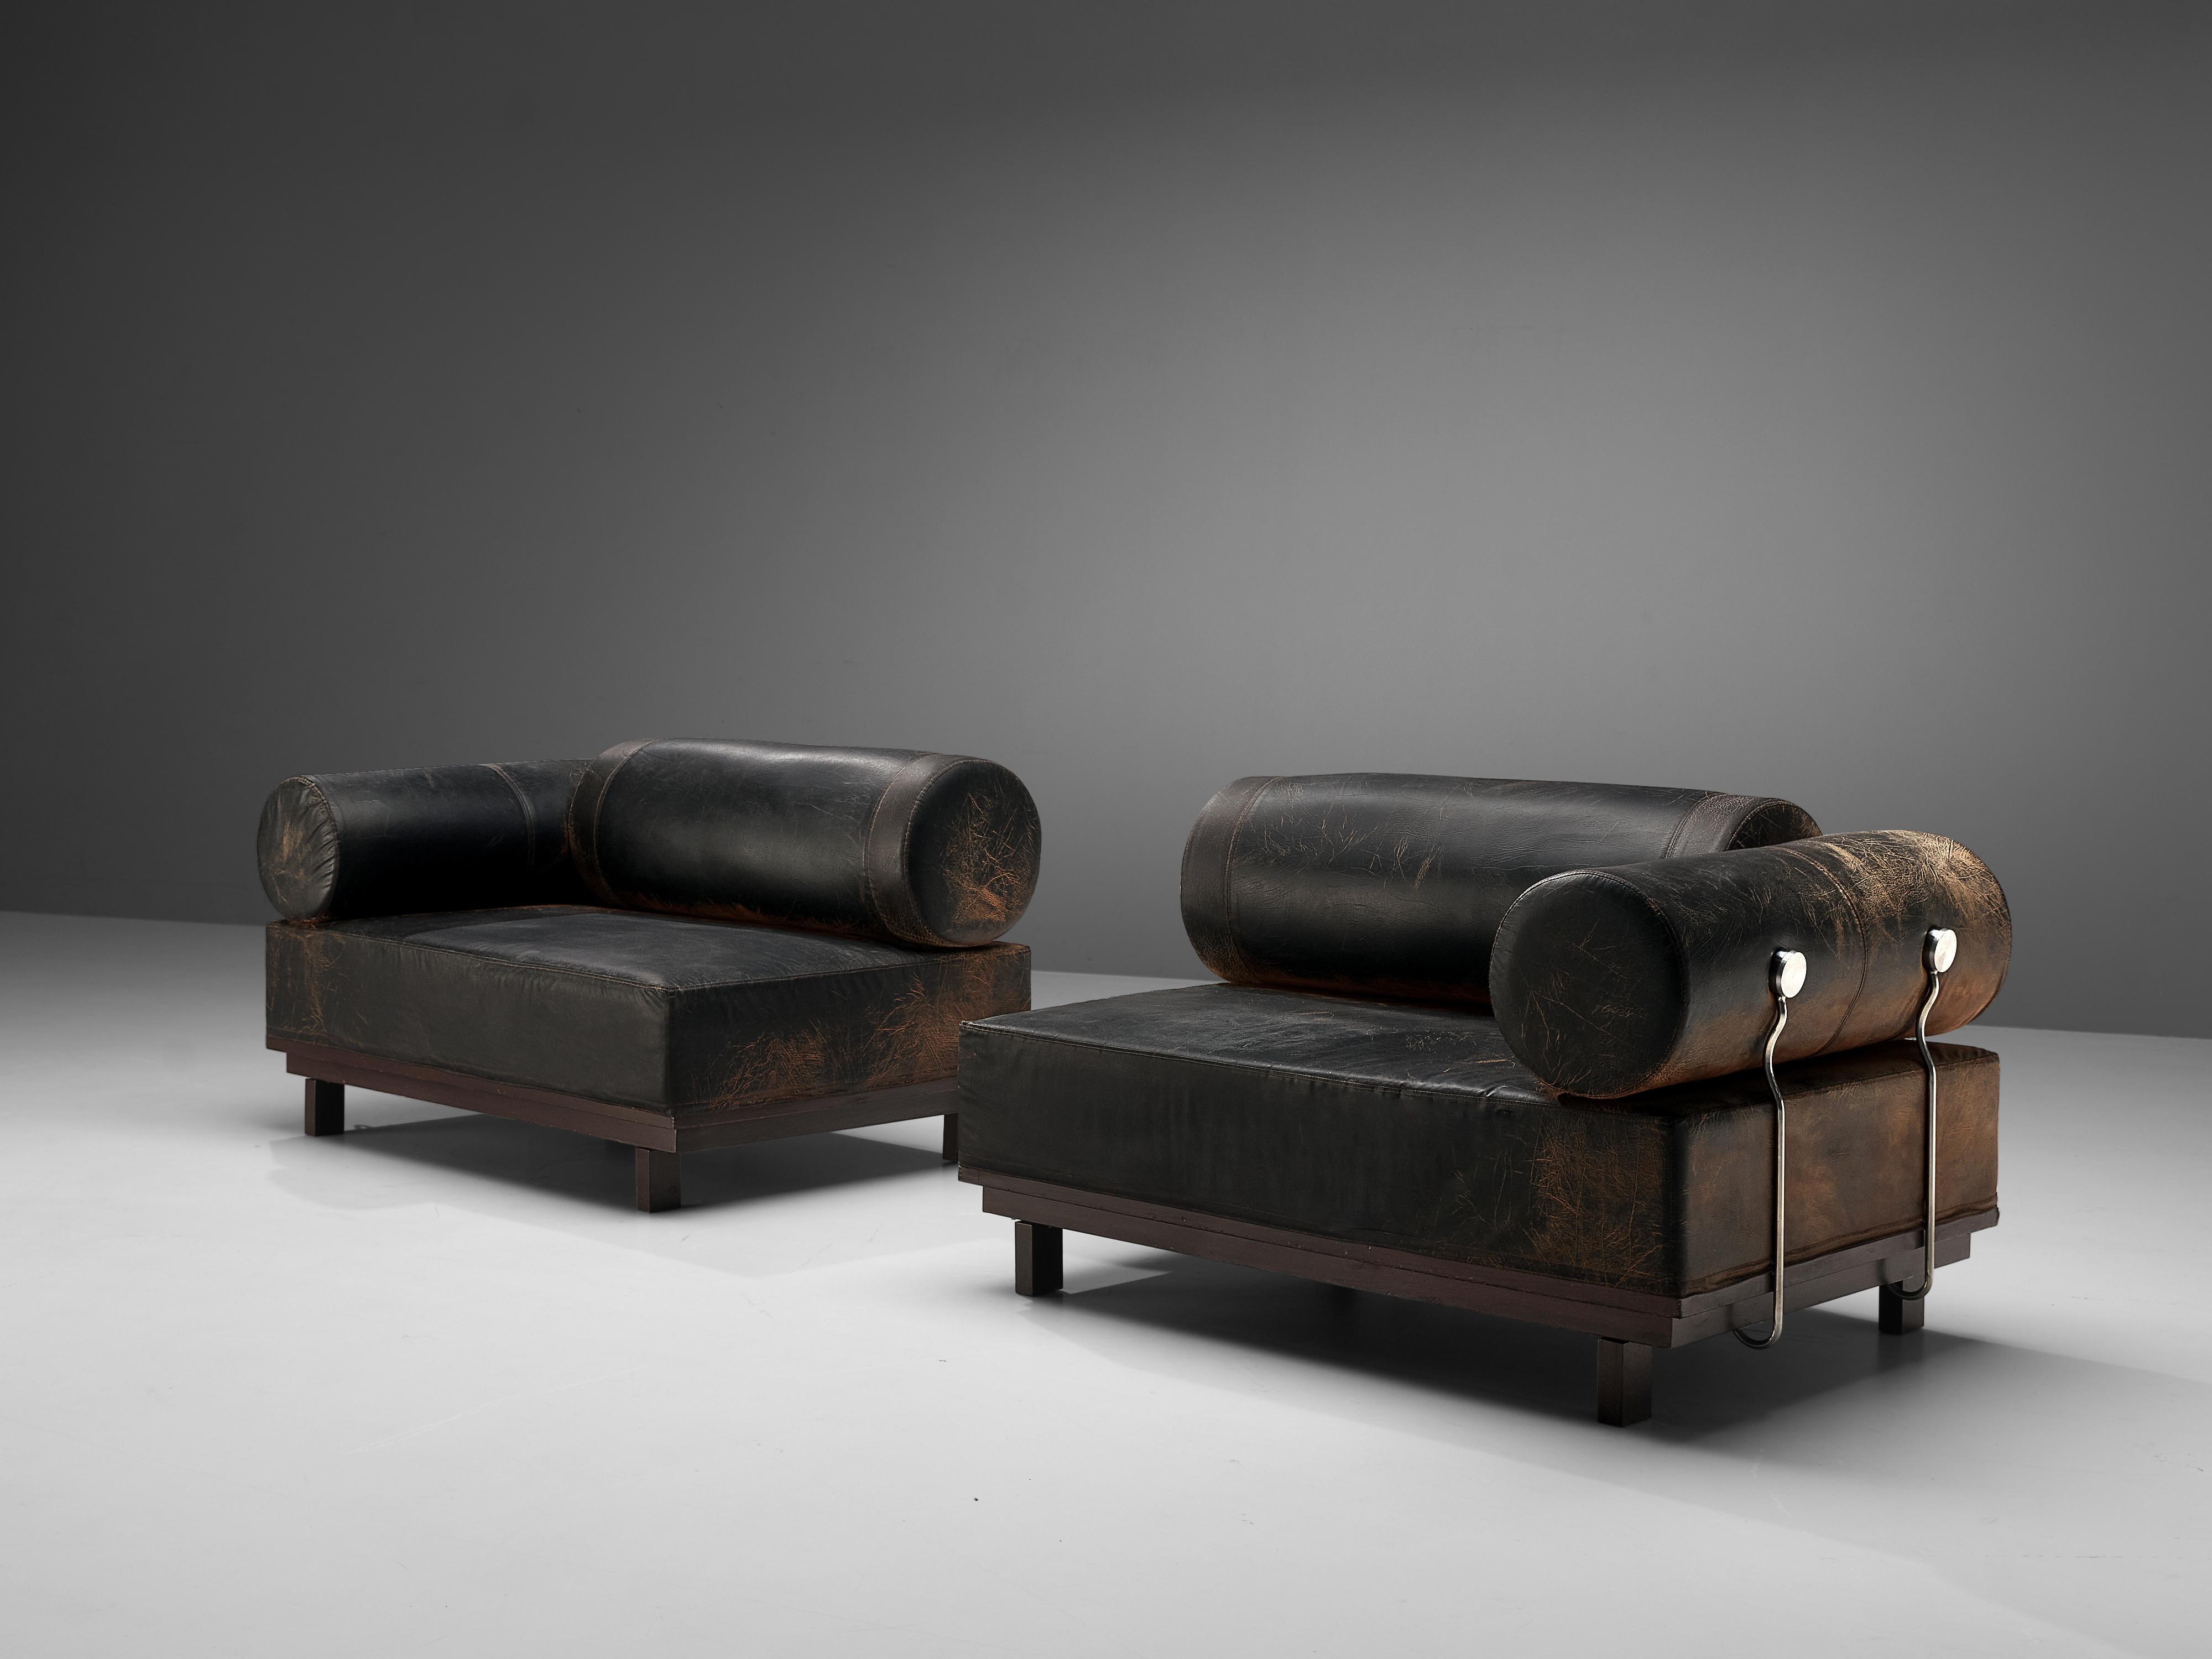 Bulky Modular Sofa in Leatherette and Metal Details 4